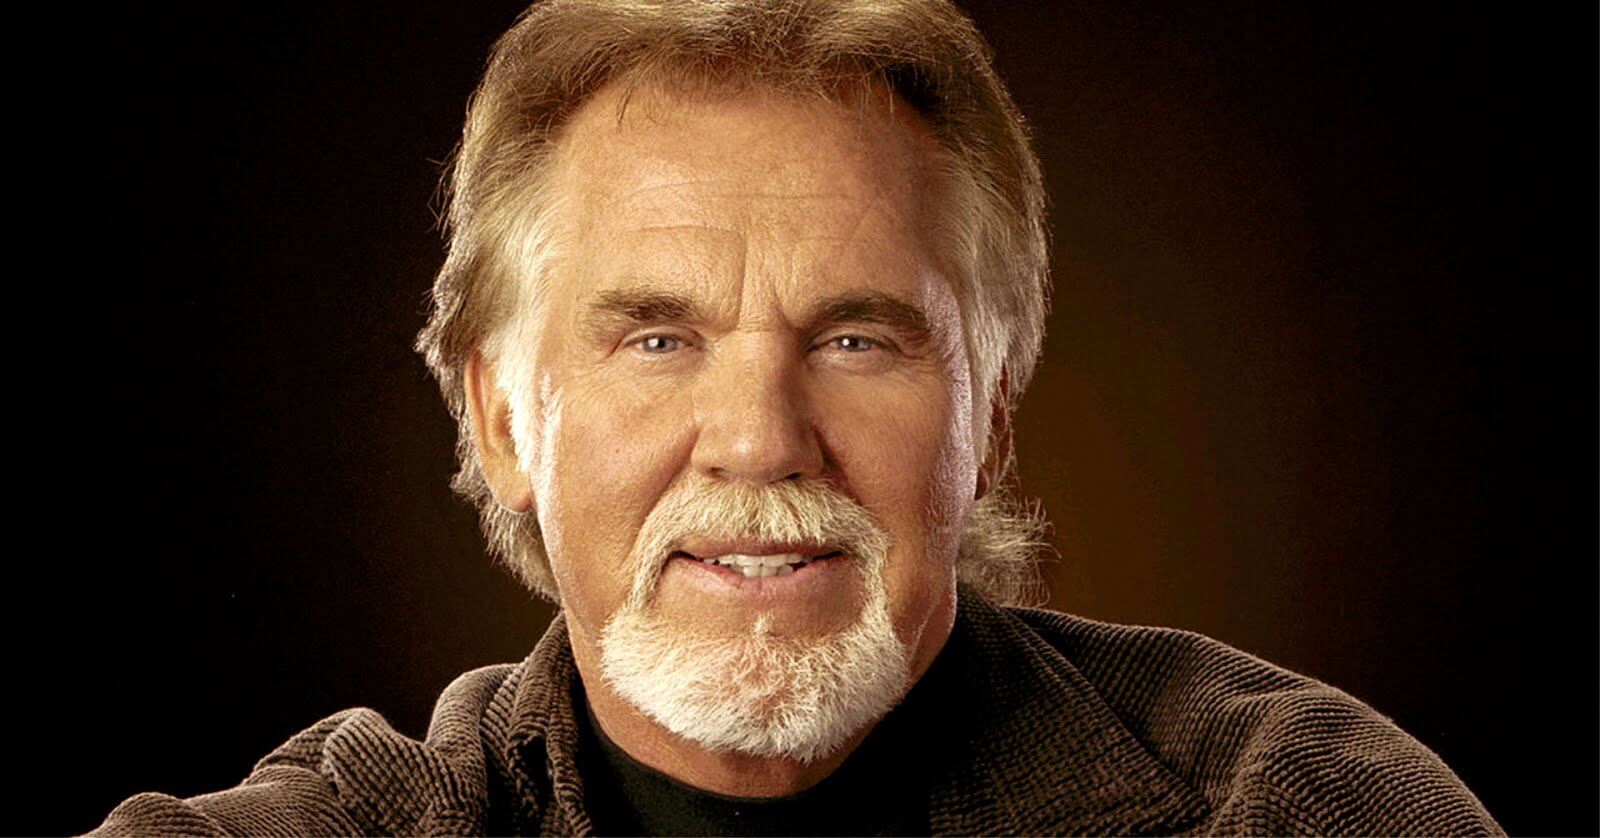 Kenny Rogers Plastic Surgery: Facelift Before & After Photos | PlasticSurgeryInsights.com